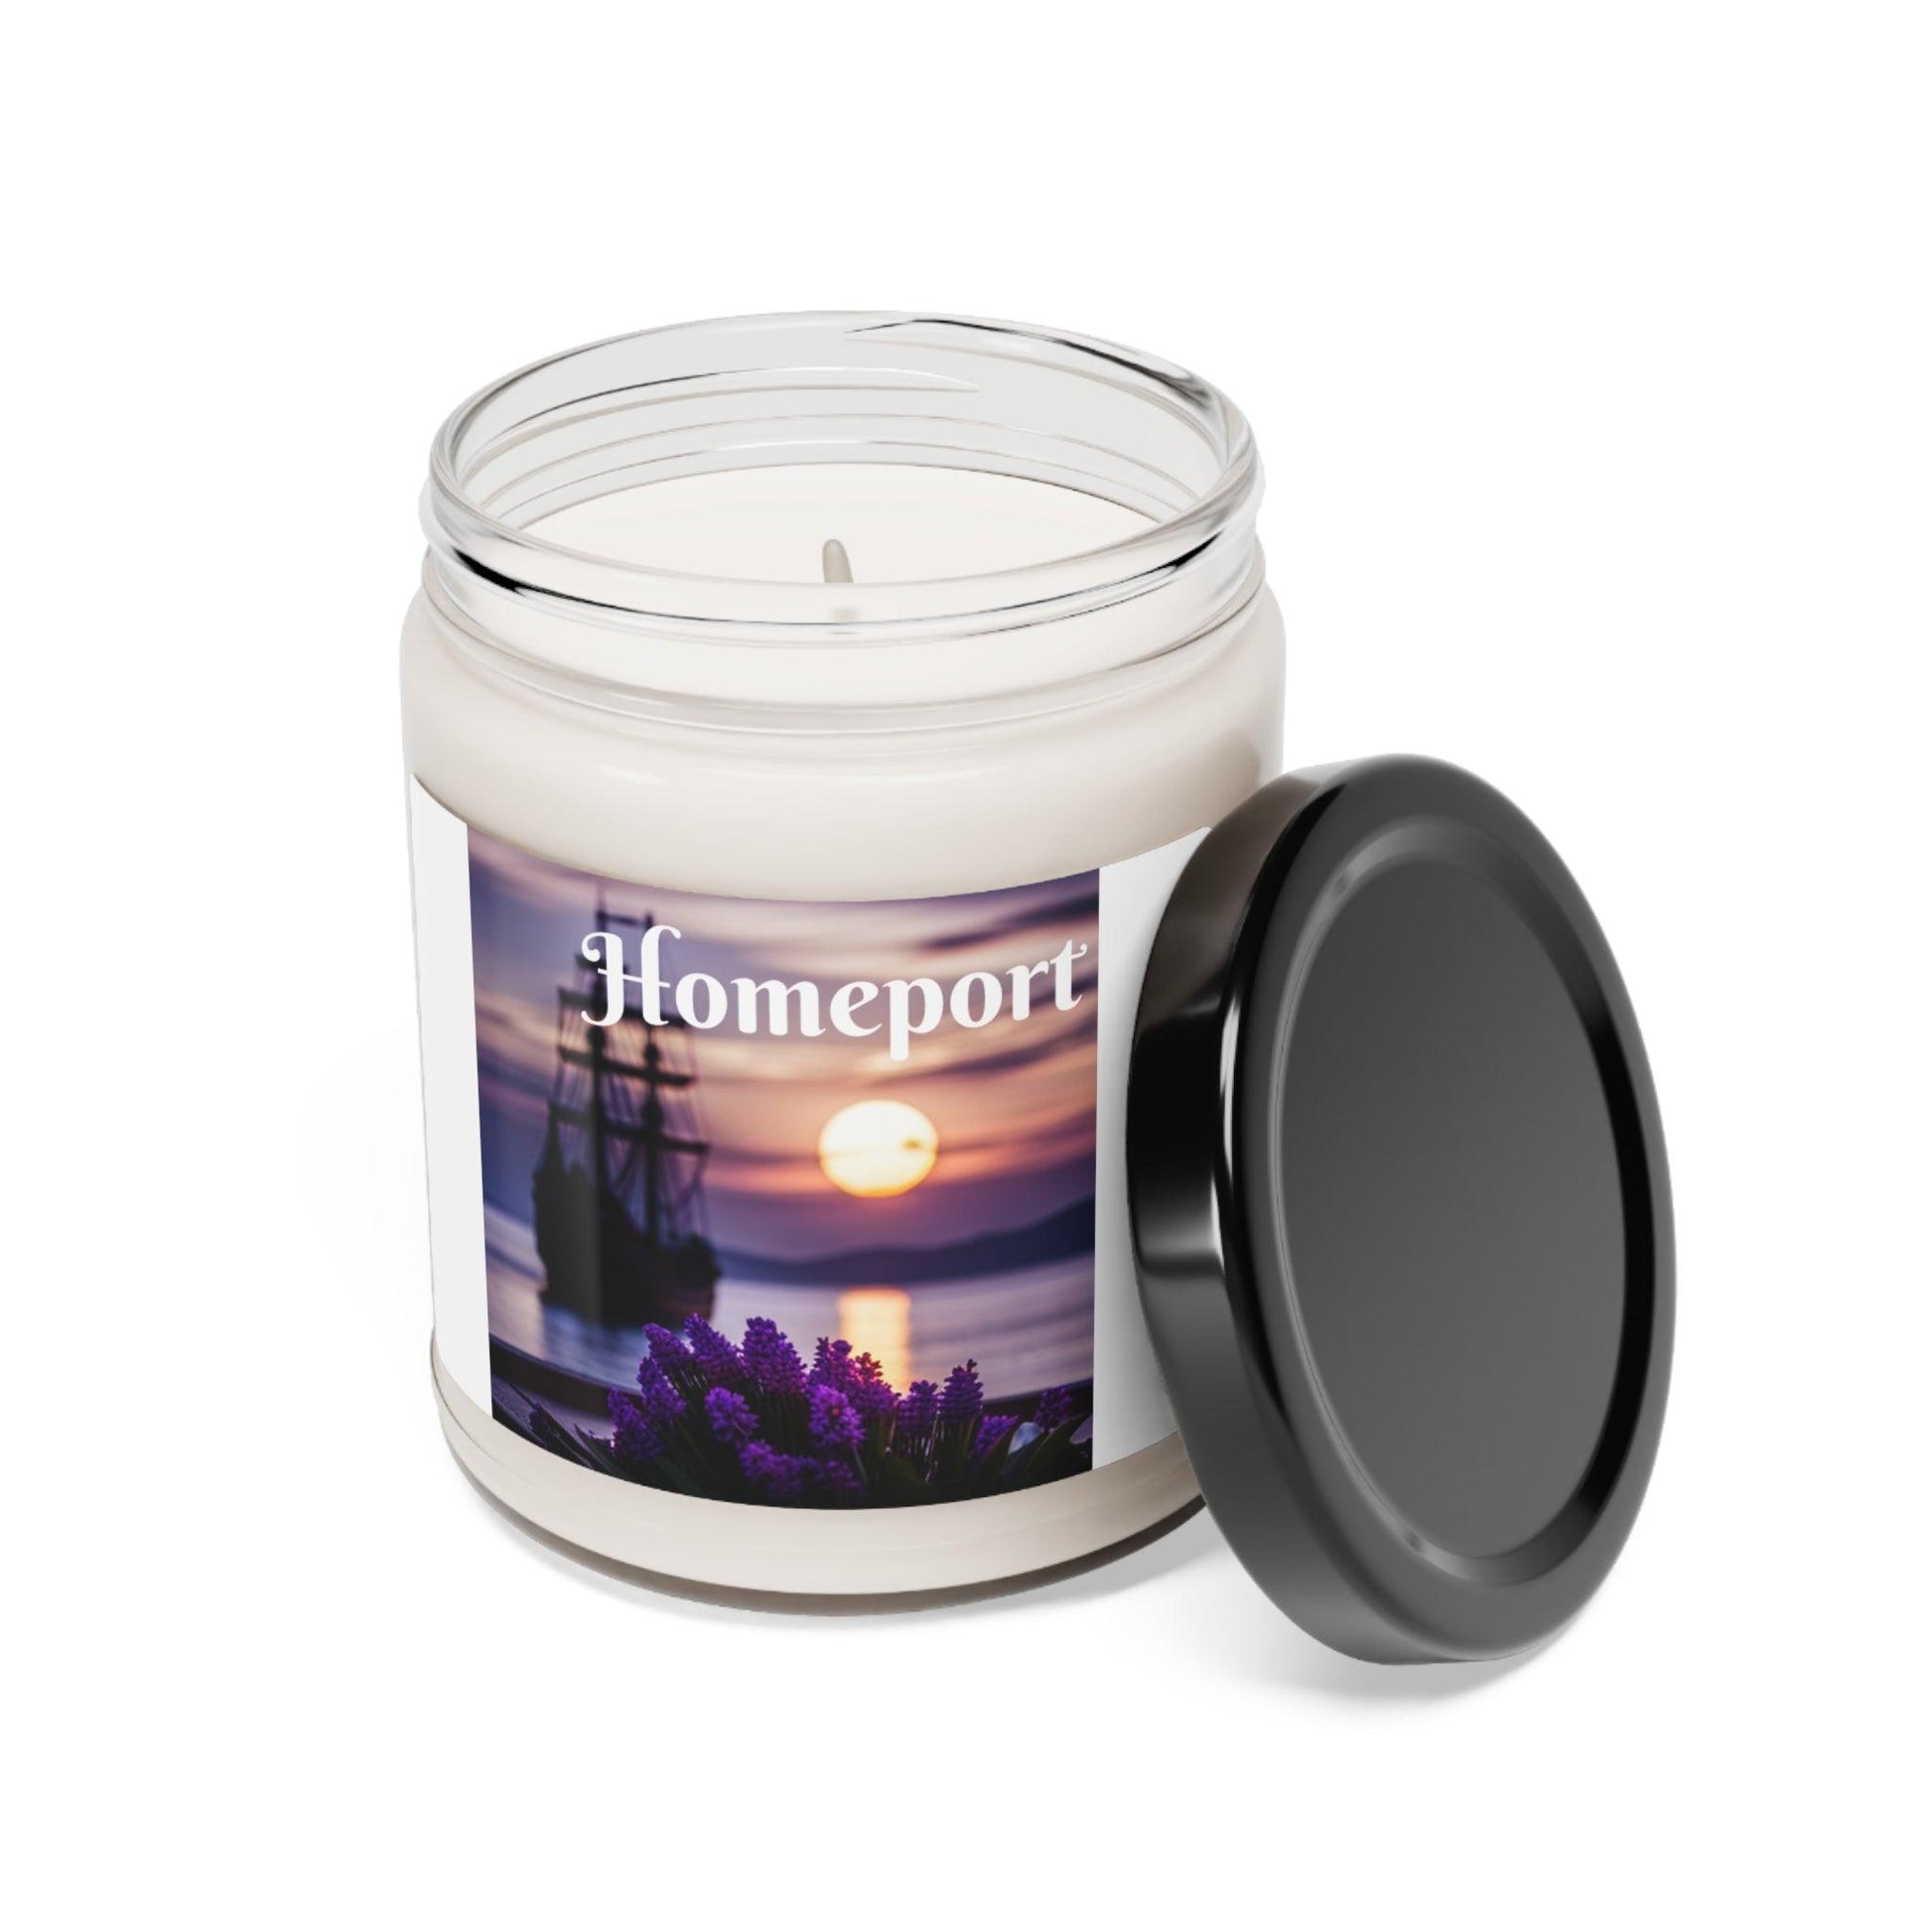 Homeport Candle - Captain's Quarters